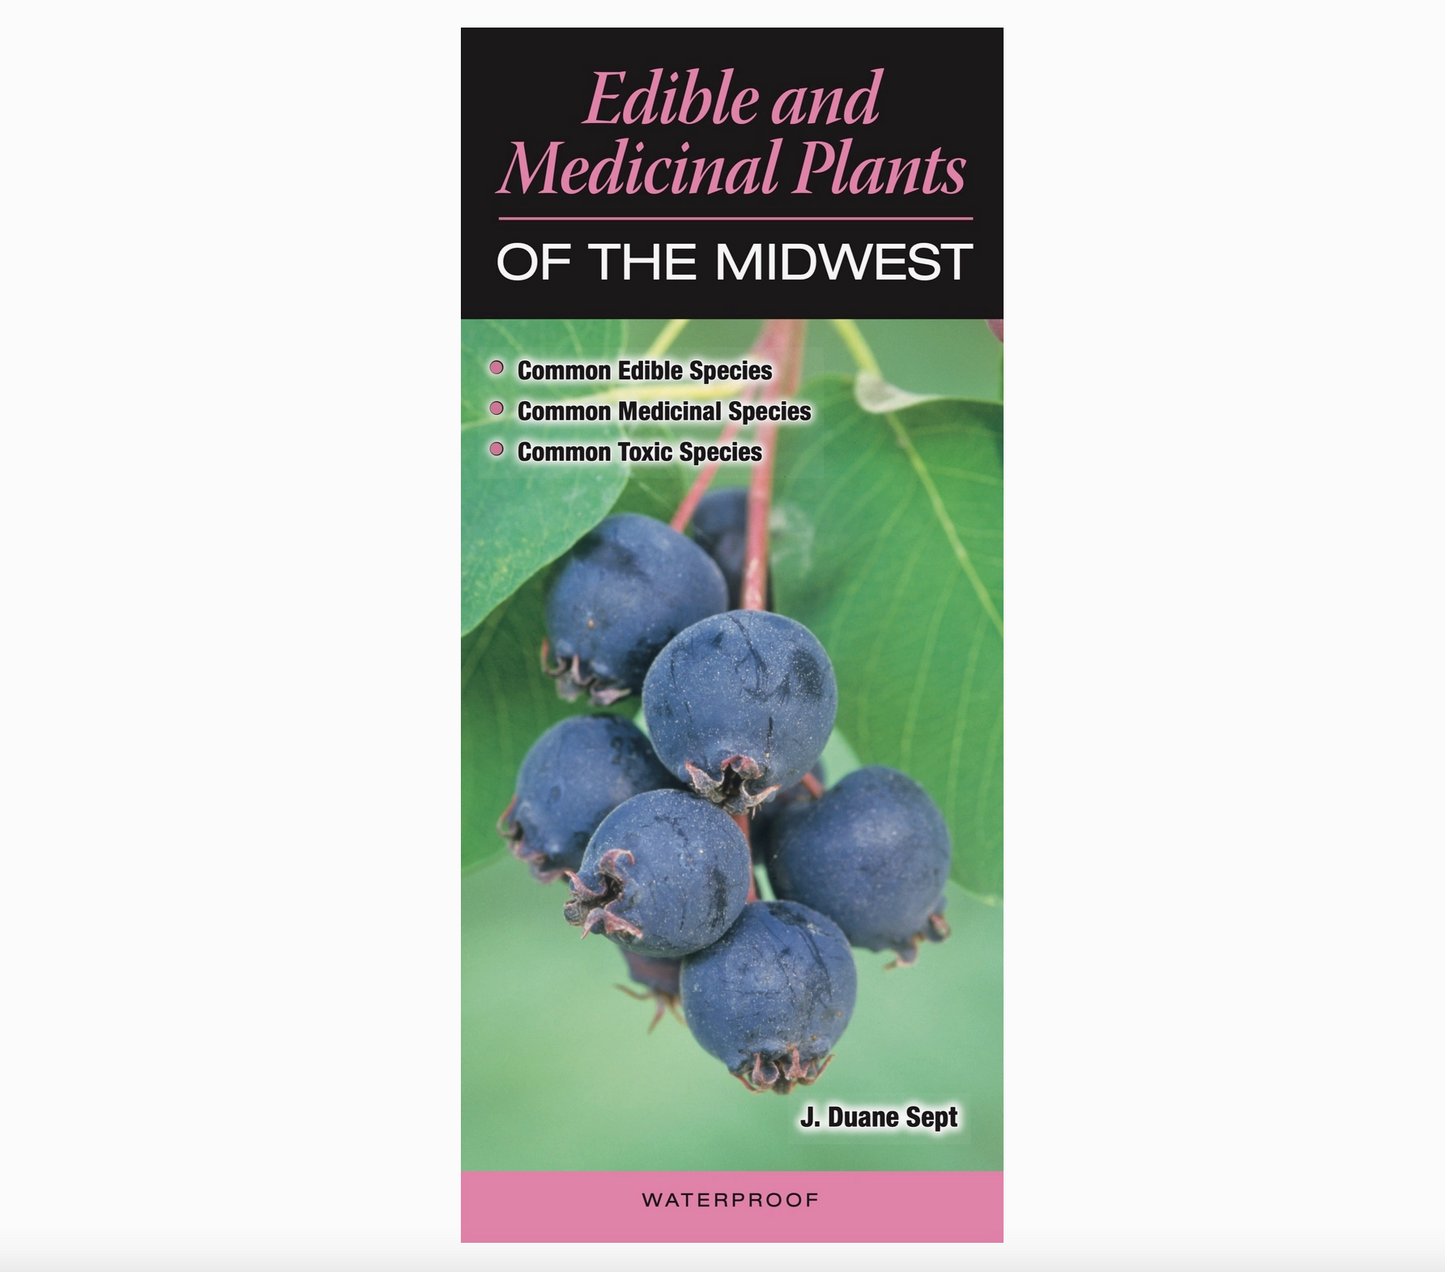 Edible & Medicinal Plants Midwest Guide